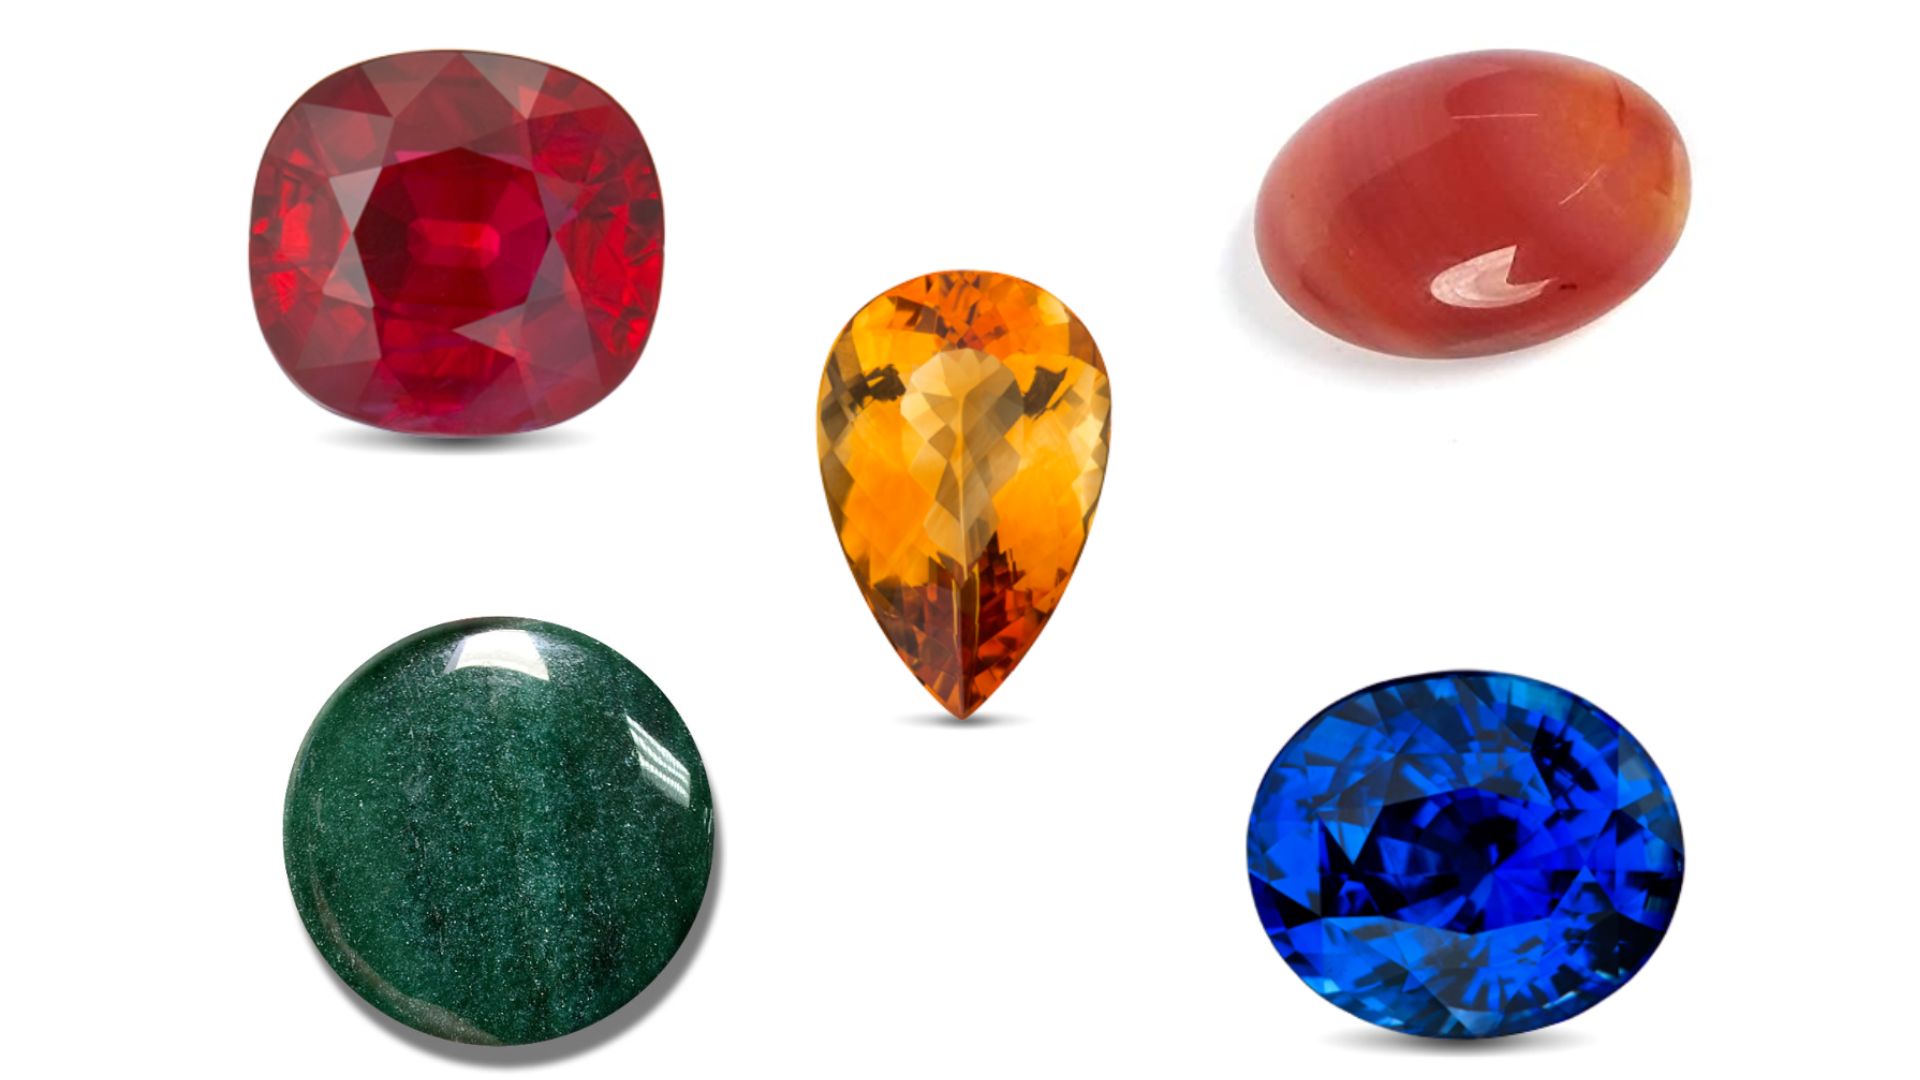 Aries Gemstone For Luck - The Power Of Gemstones For A Fortunate Future